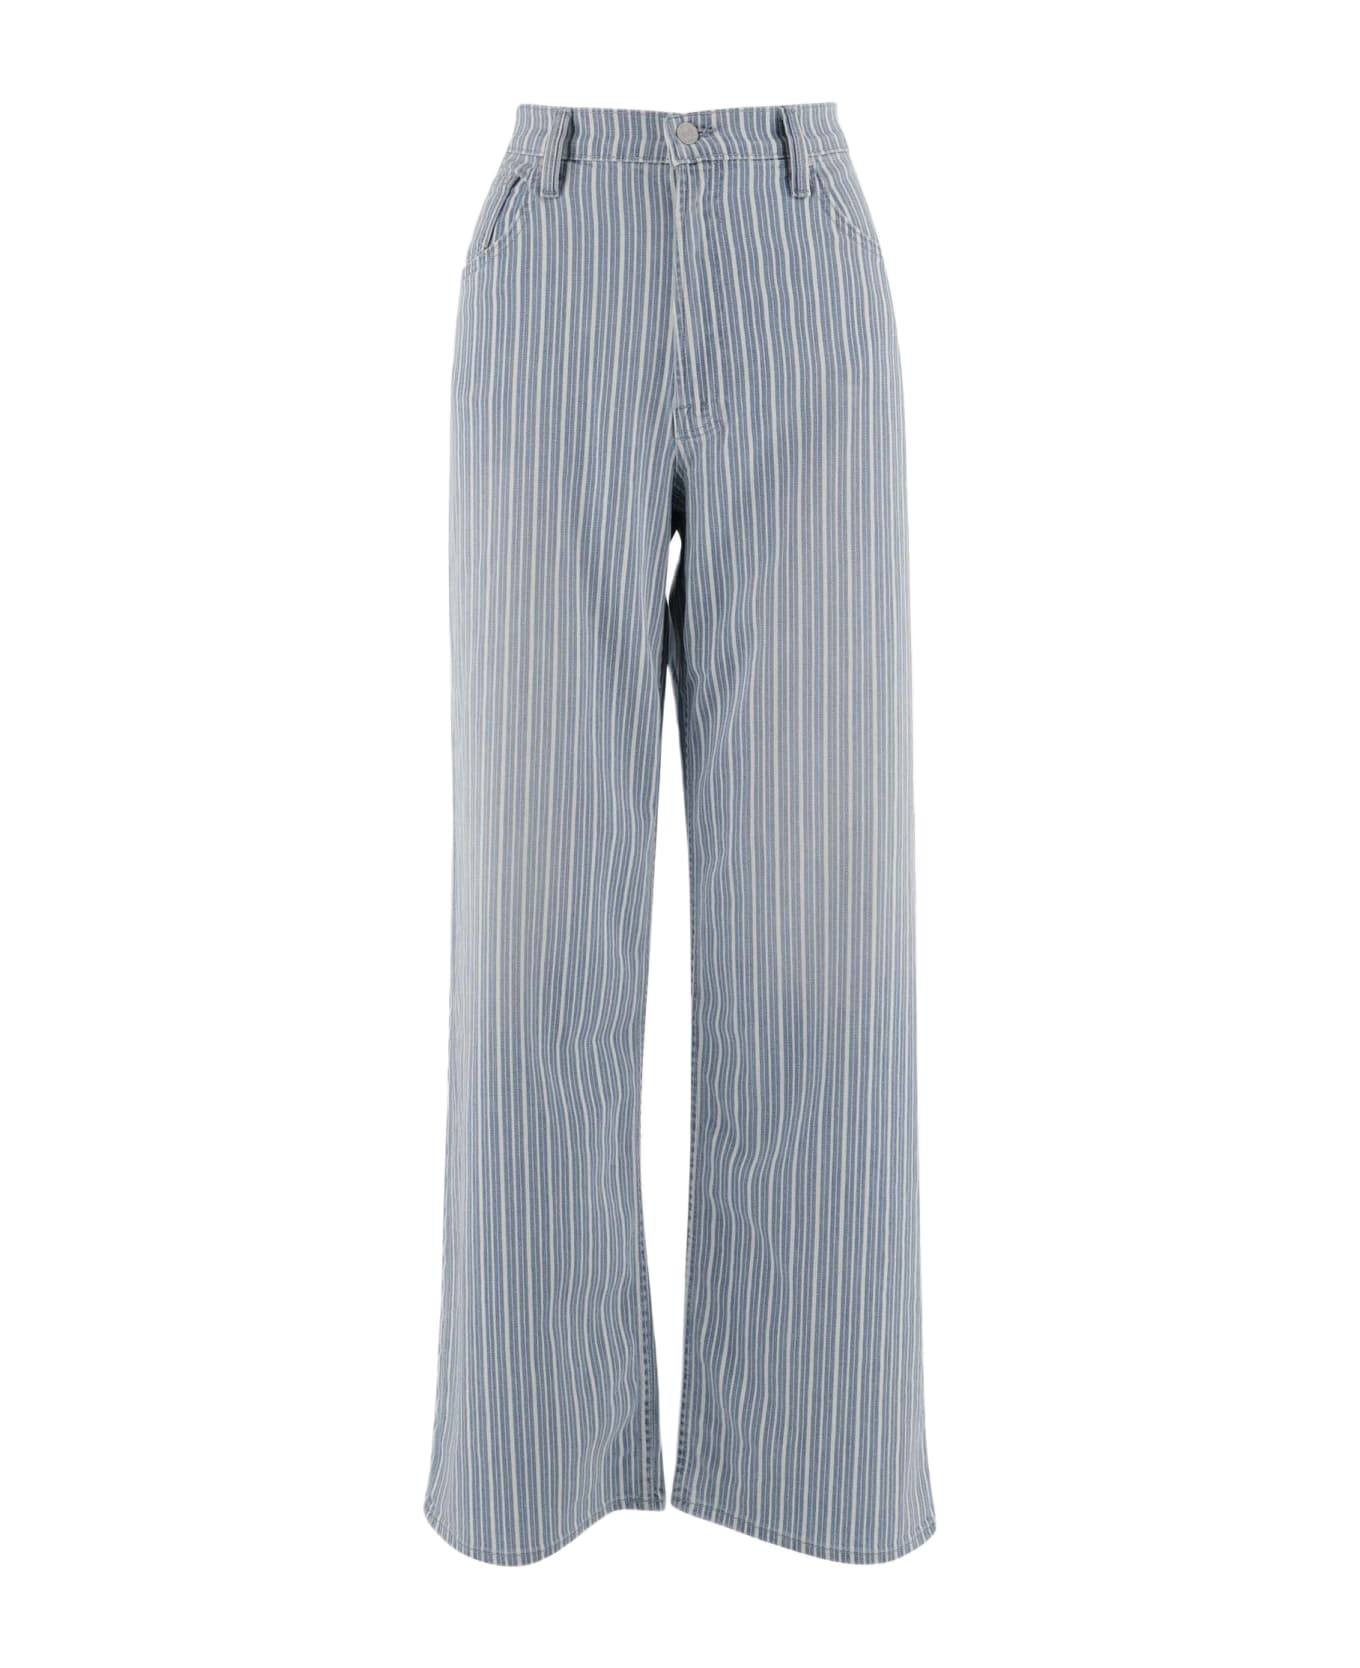 Mother Stretch Cotton Striped Flared Jeans - Denim ボトムス